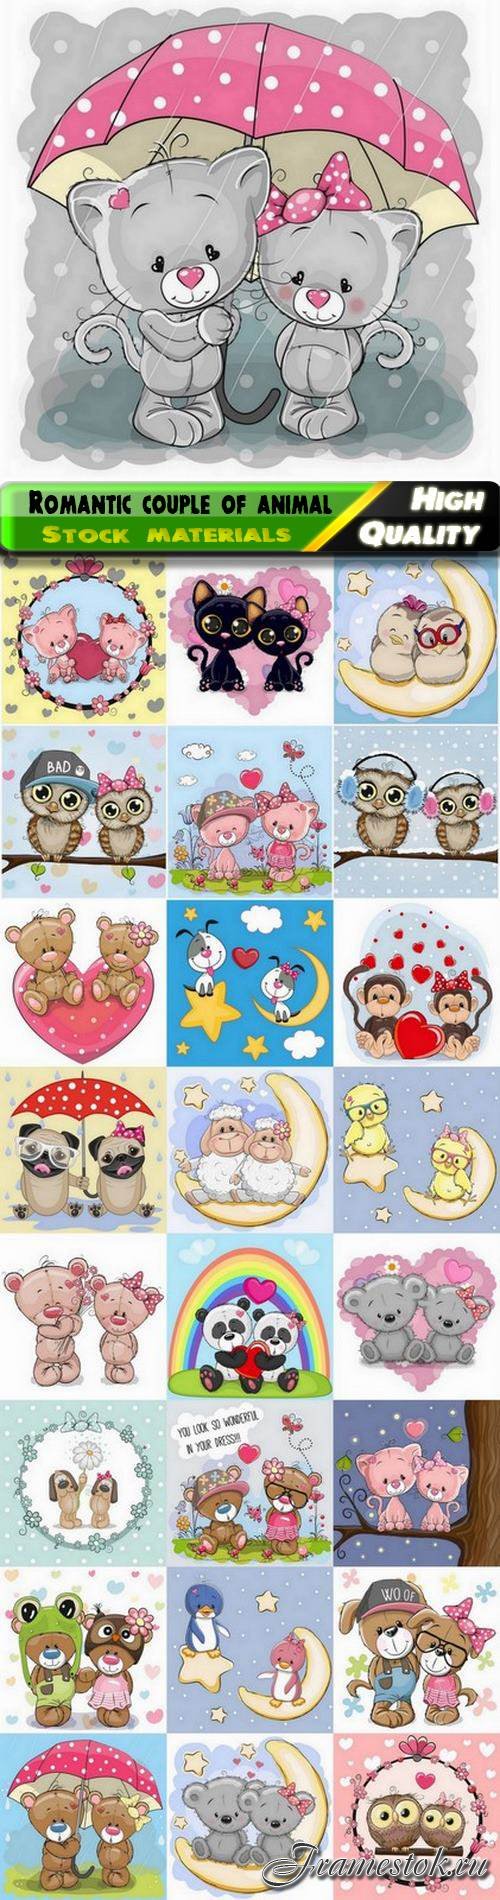 Cartoon animal romantic couple in love for valentines day card - 25 Eps